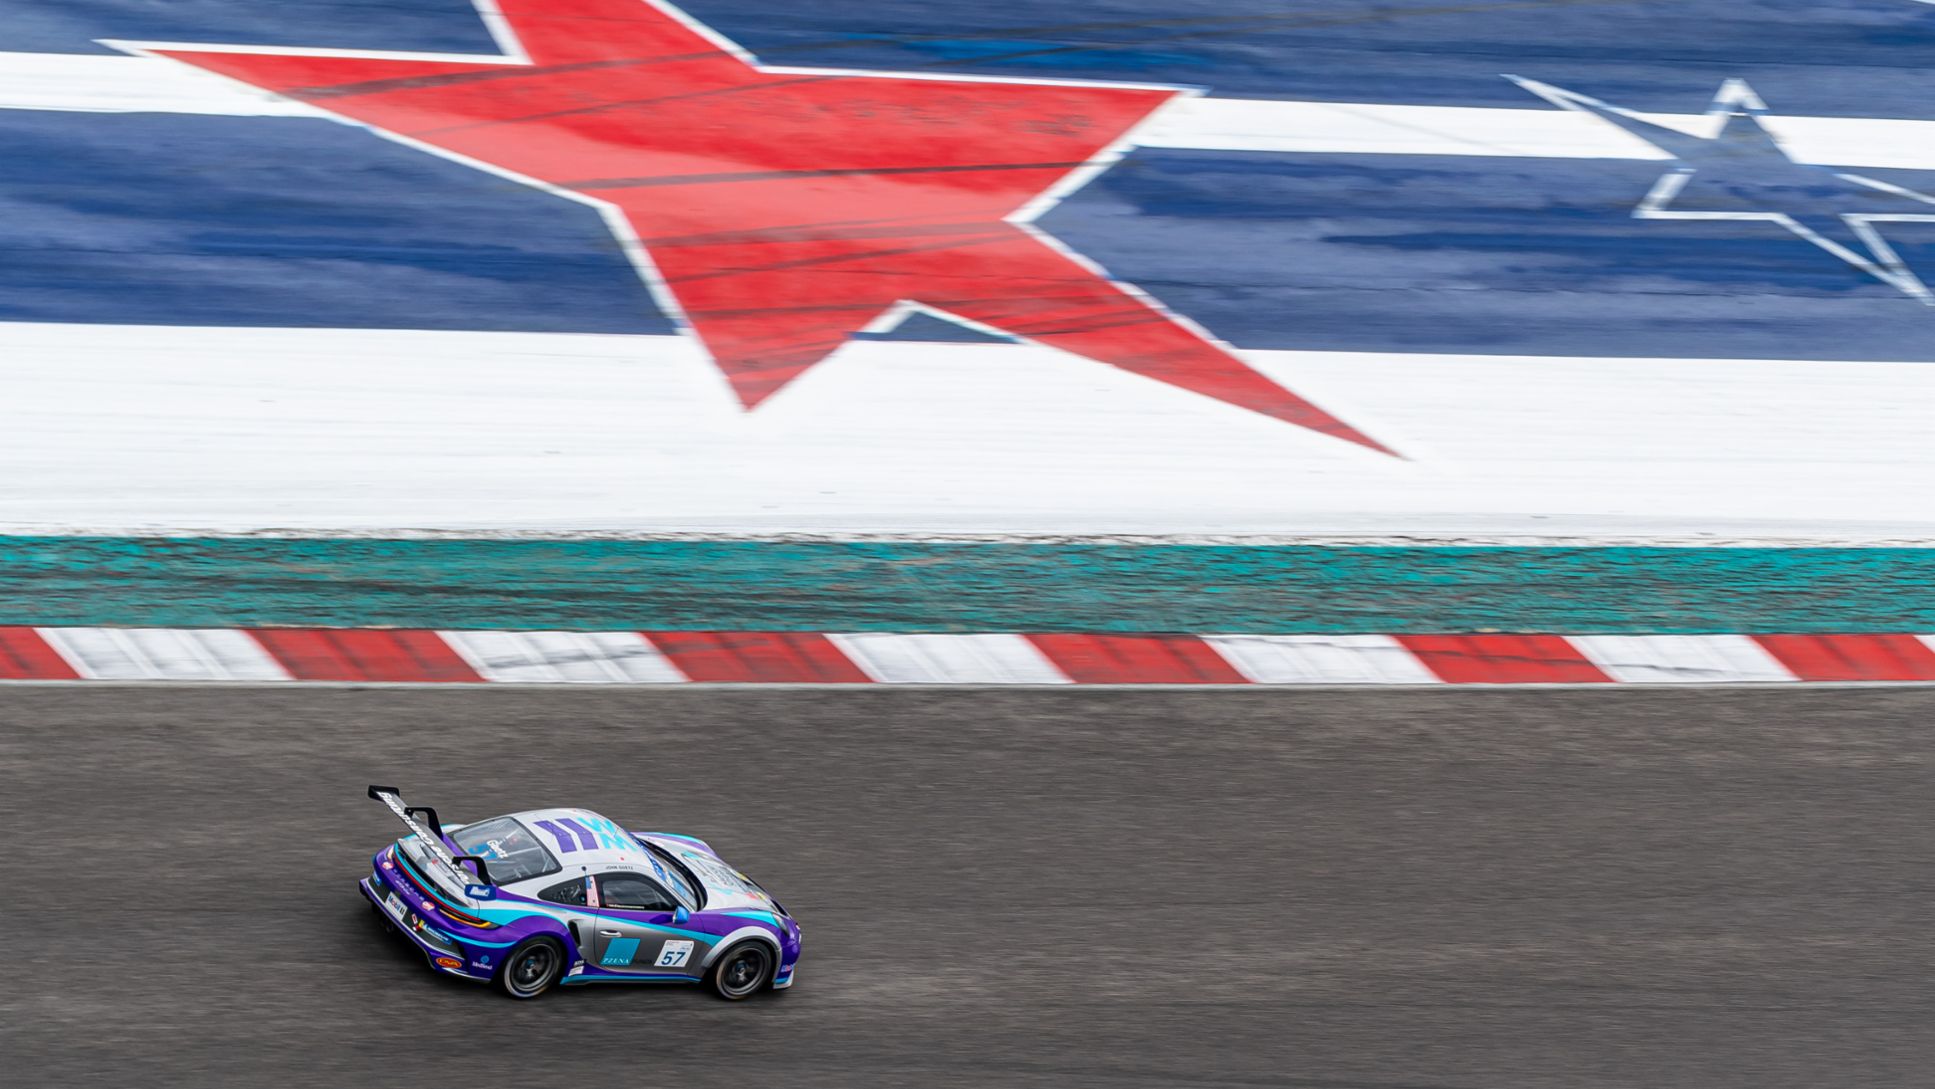 John Goetz (USA) in the No. 57 Wright Motorsports Porsche 911 GT3 Cup car at COTA - Porsche Carrera Cup North America Presented by the Cayman Islands during COTA Practice, 911 GT3 Cup, COTA, Austin, 2021, PCNA